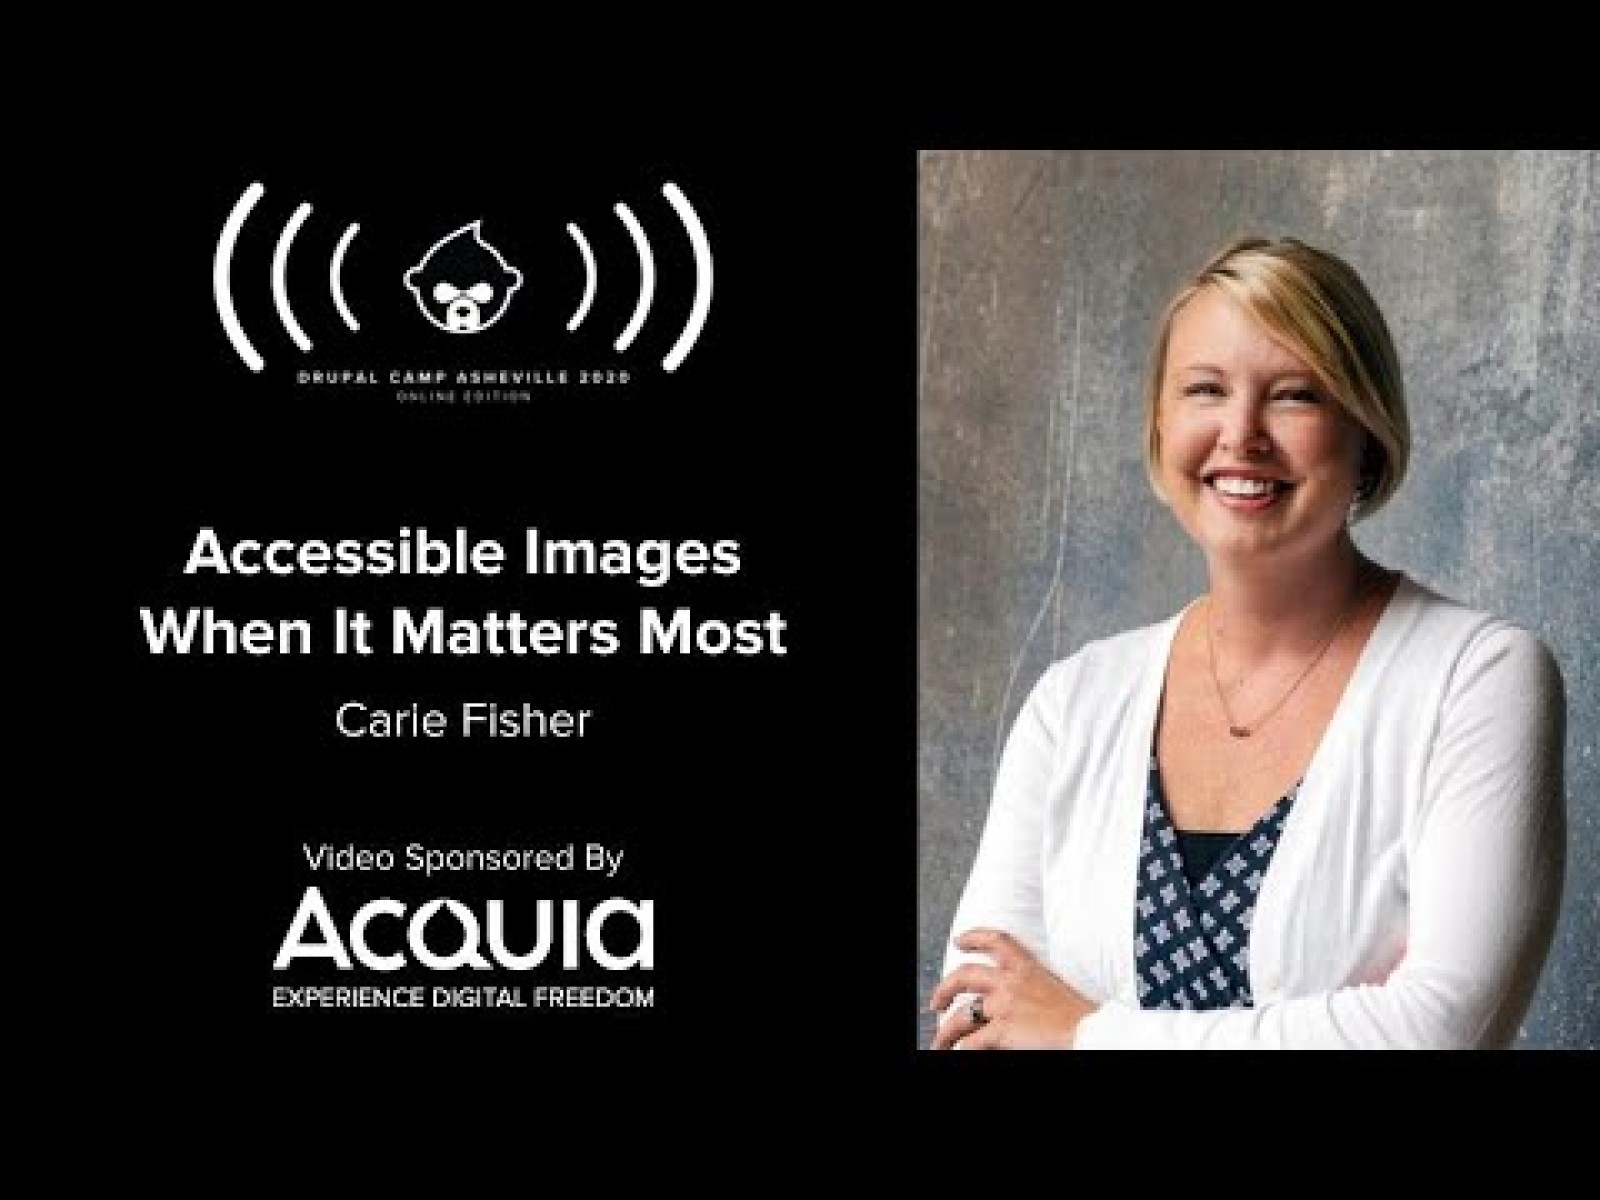 Accessible Images When It Matters Most